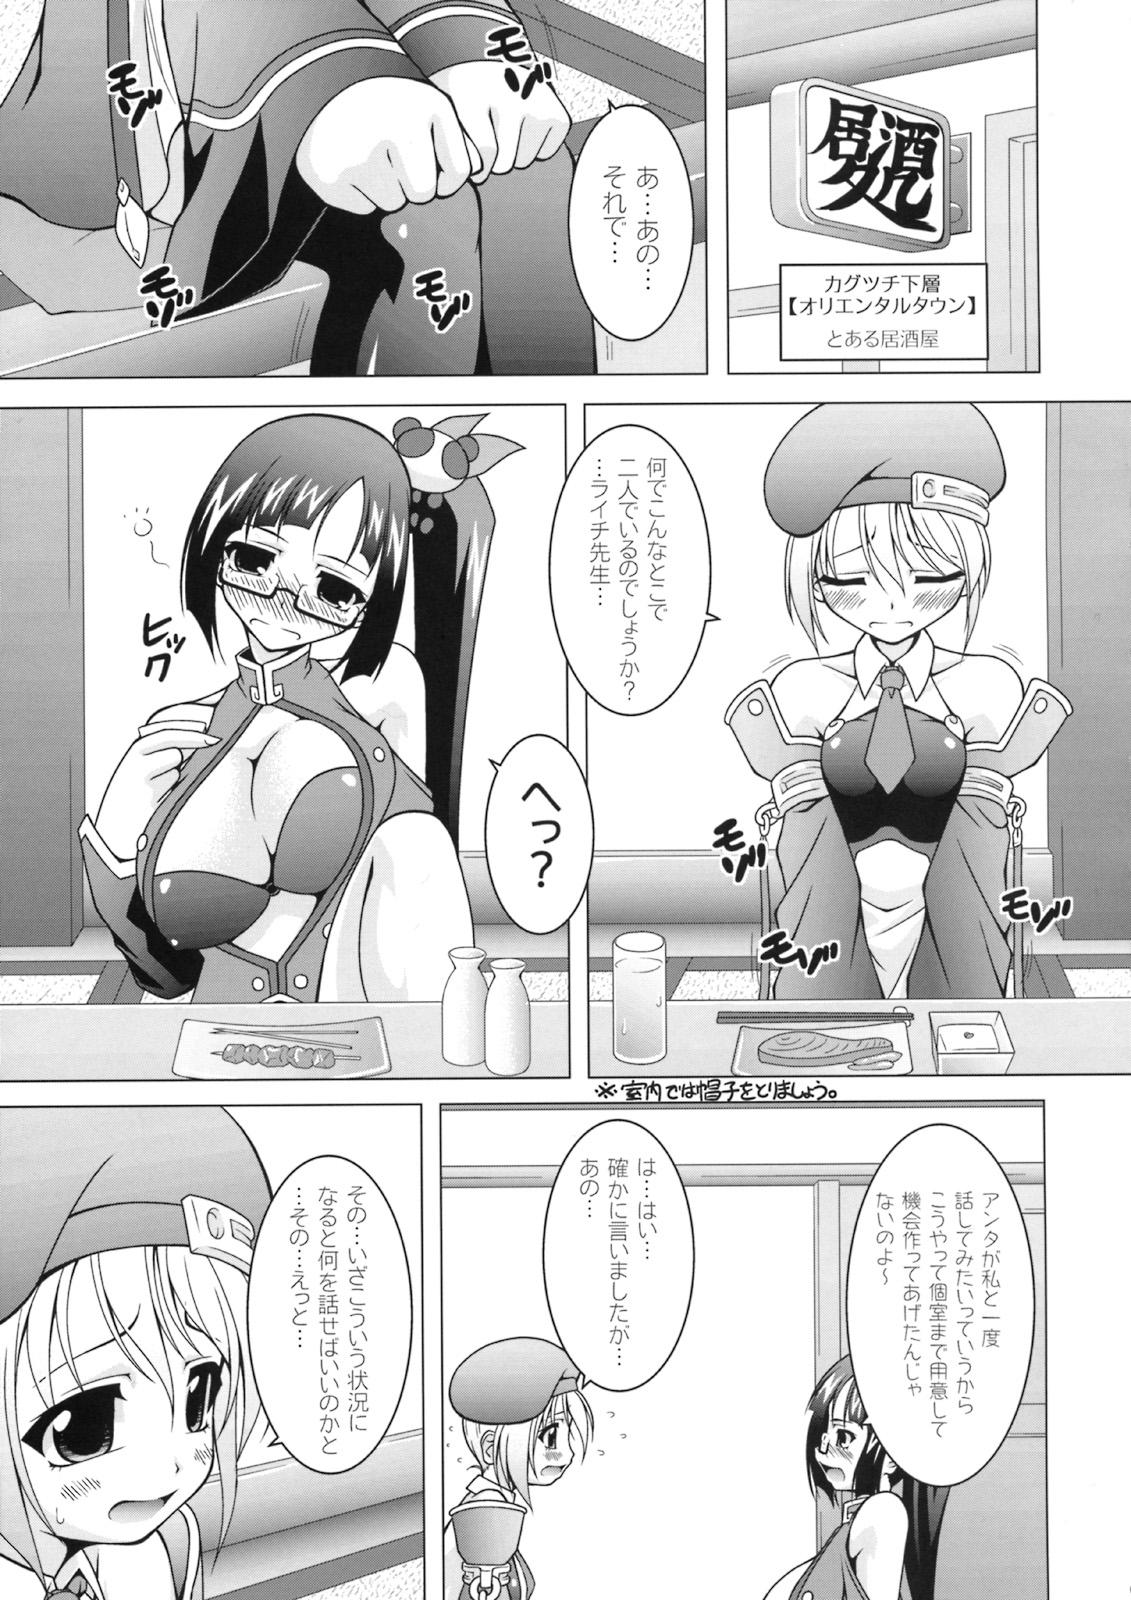 Cbt BLUE BERRY - Blazblue Indonesian - Page 6